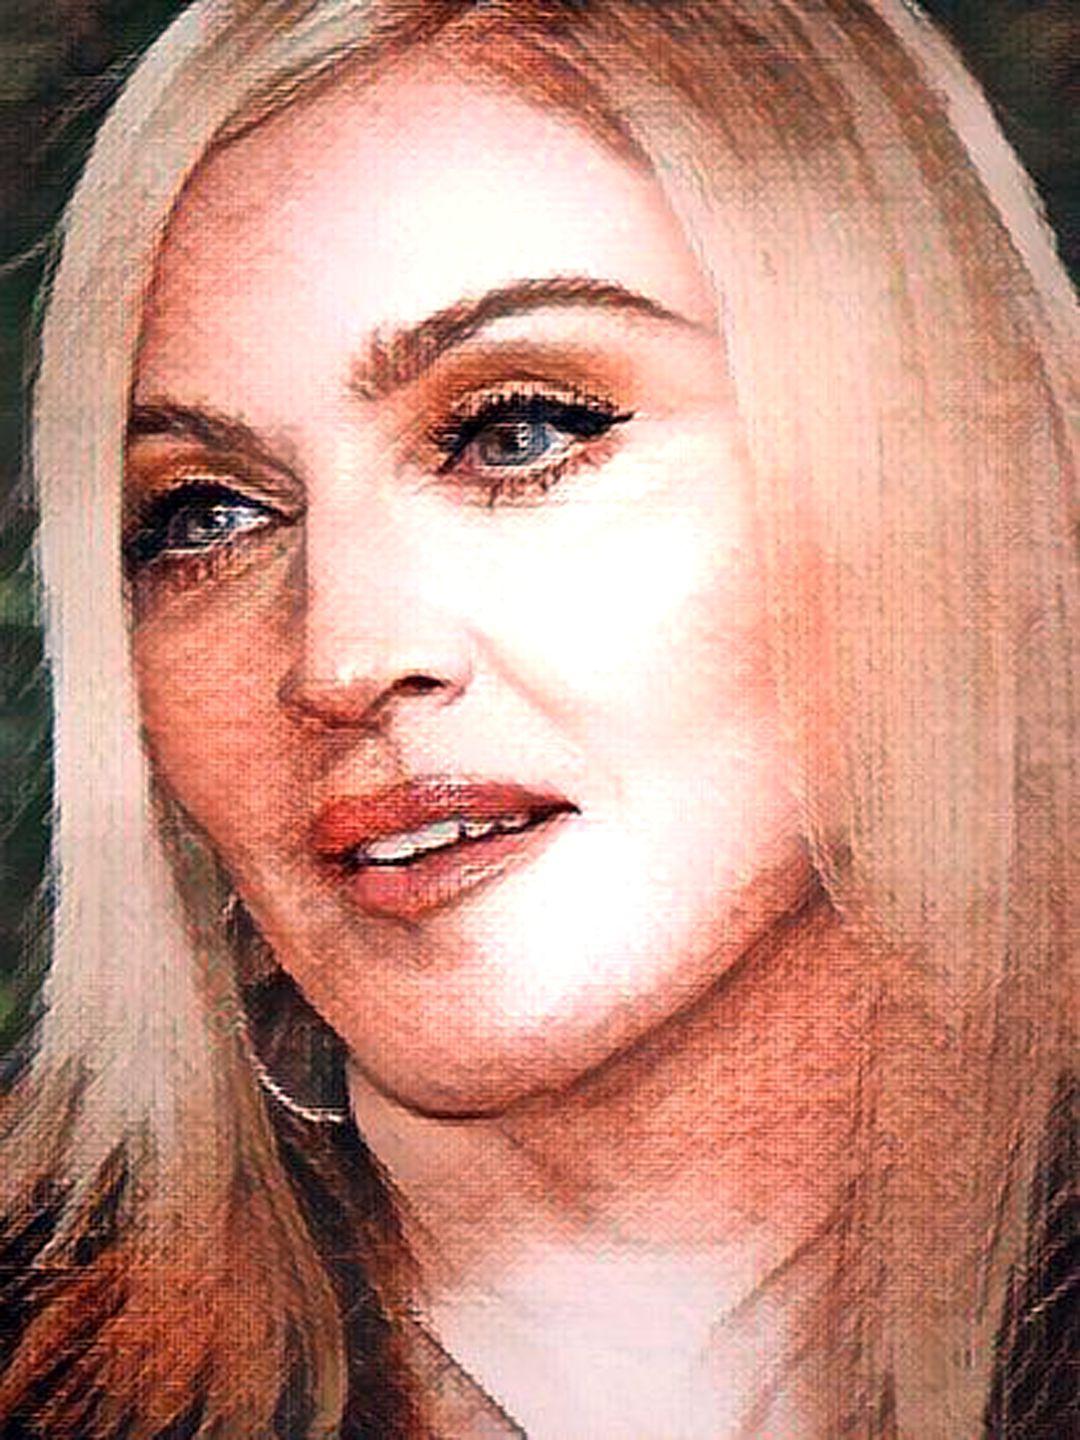 Mia Kalif Sexy Videos - Madonna # 36 - Celeb ART - Beautiful Artworks of Celebrities, Footballers,  Politicians and Famous People in World | OpenSea